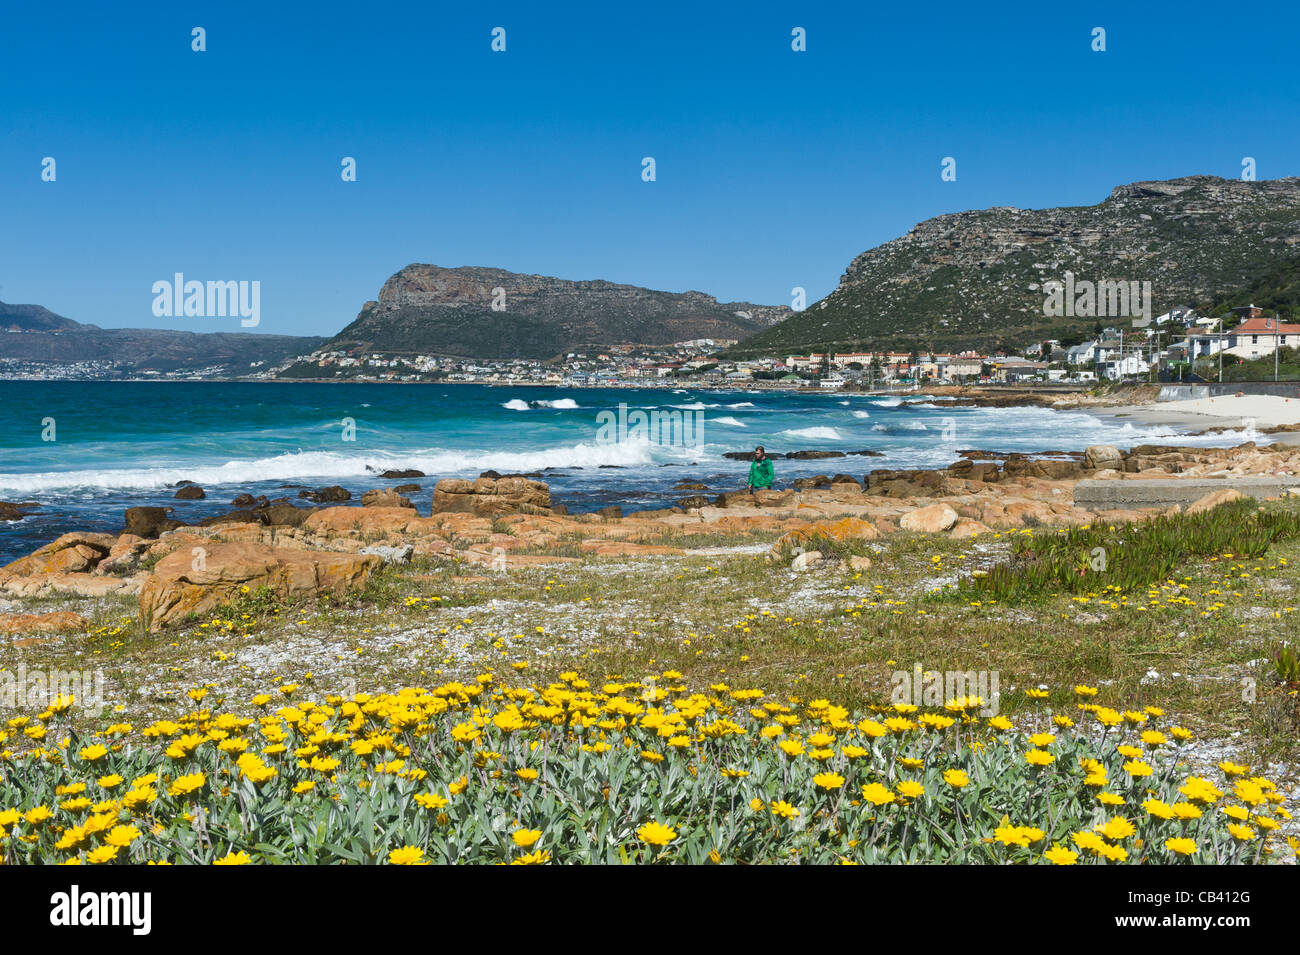 Kalk Bay view from St James beach near Simons Town Western Cape South Africa Stock Photo